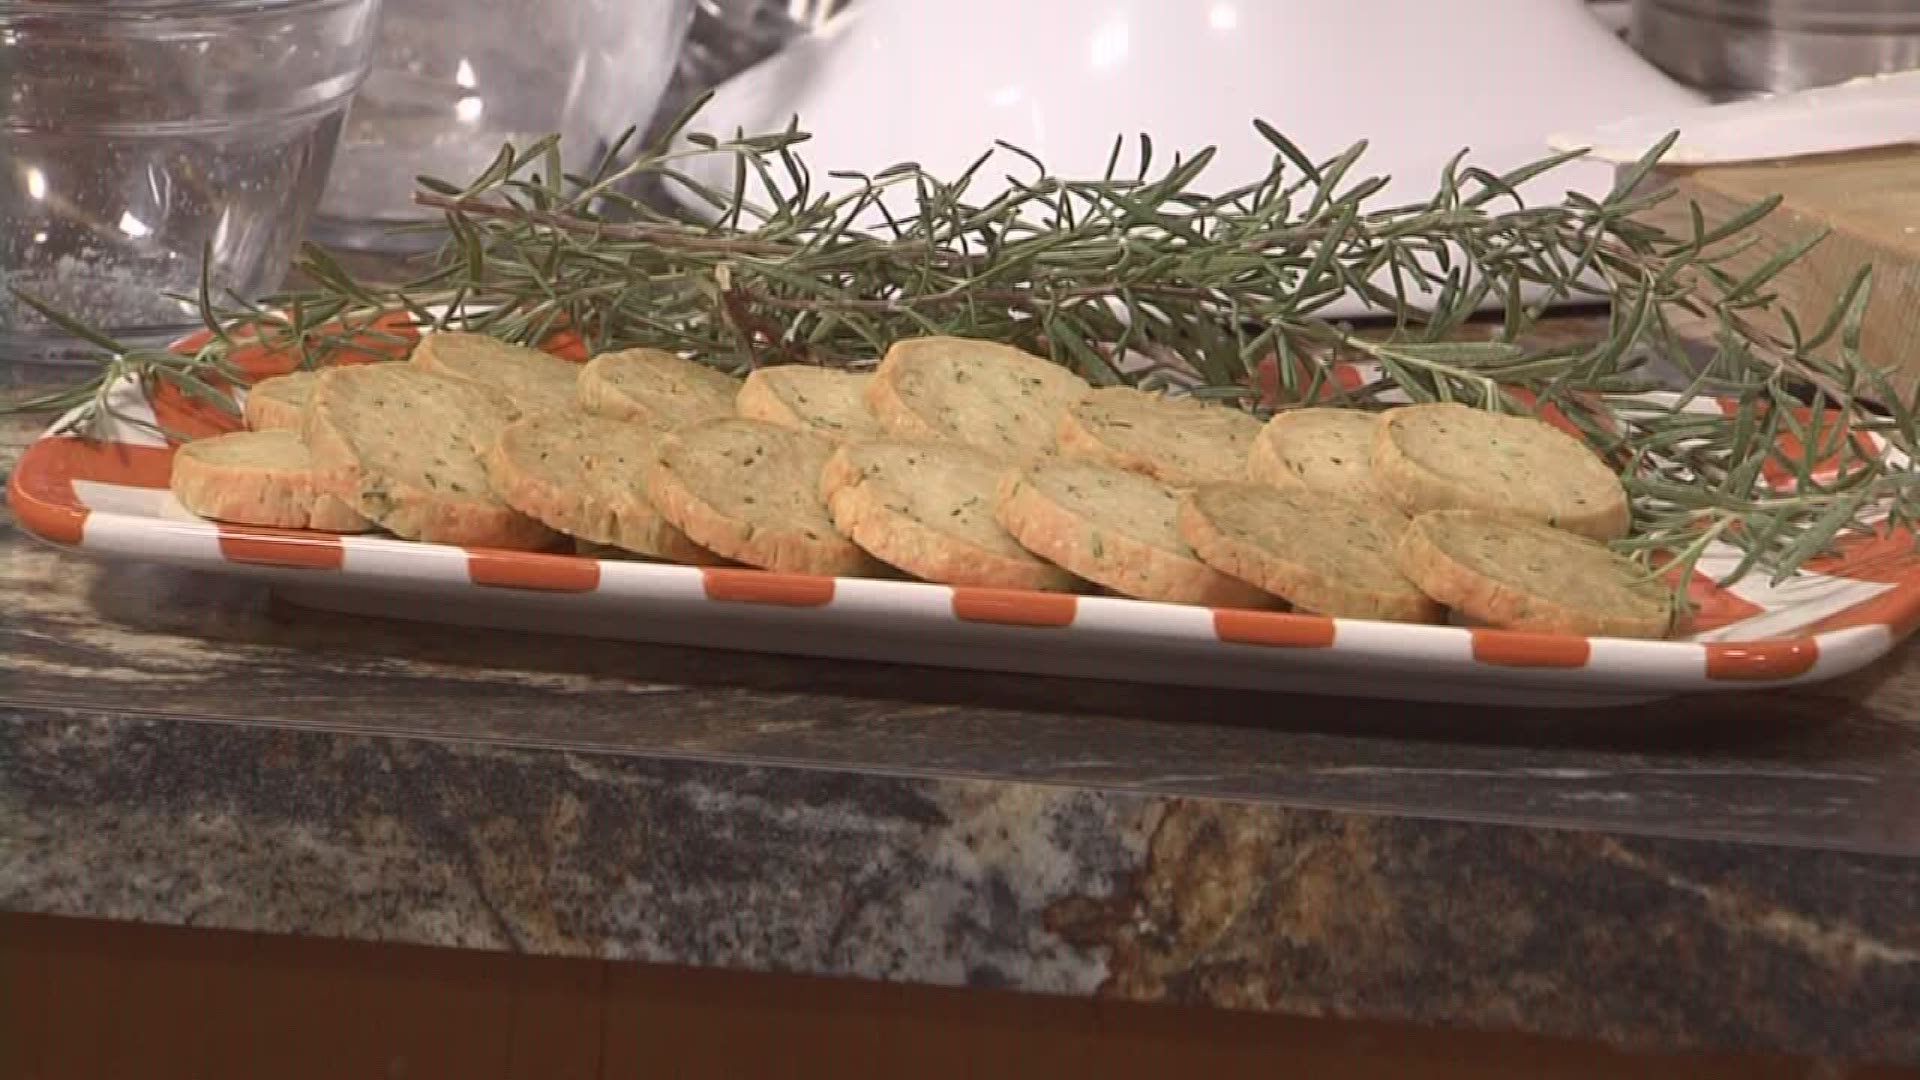 Joy McCabe shares a simple recipe for homemade crackers to take to your tailgateSeptember 7, 2017, 4pm